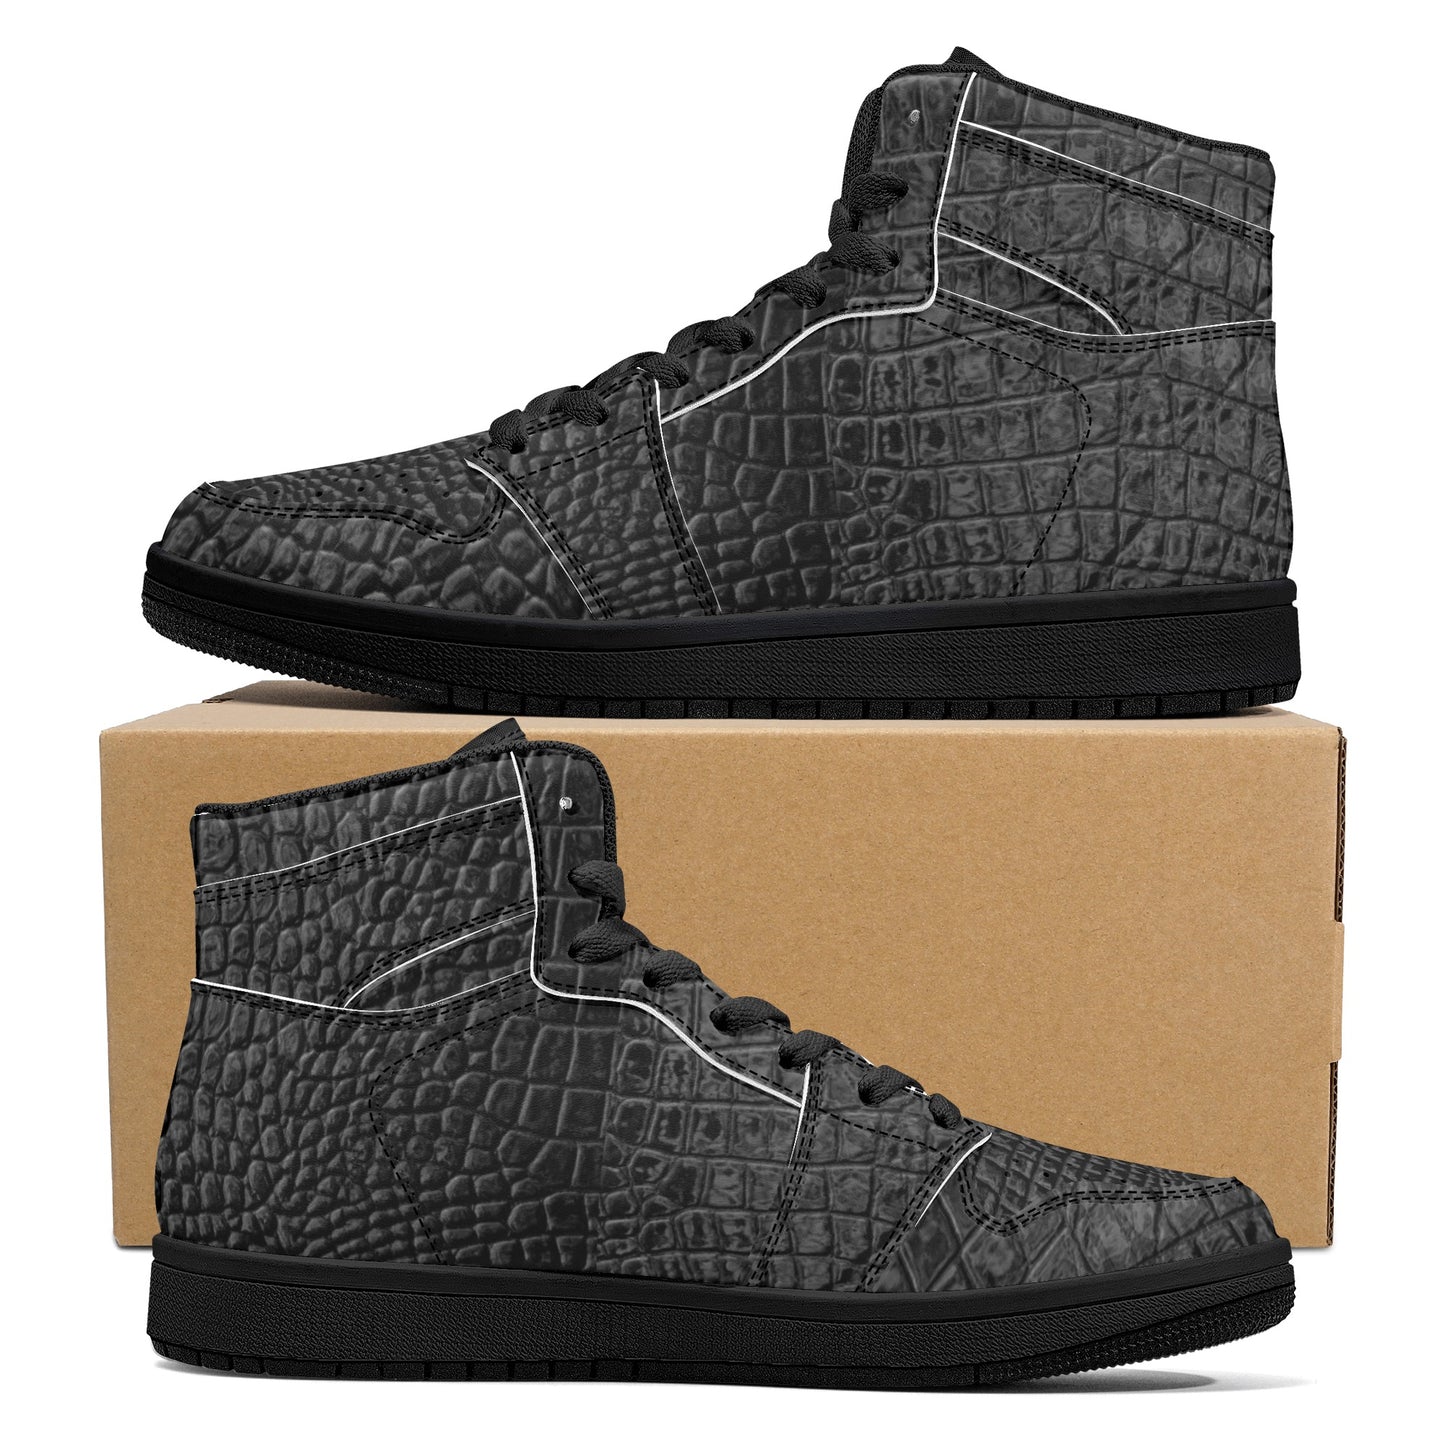 Women's Black High Top Leather Sneakers